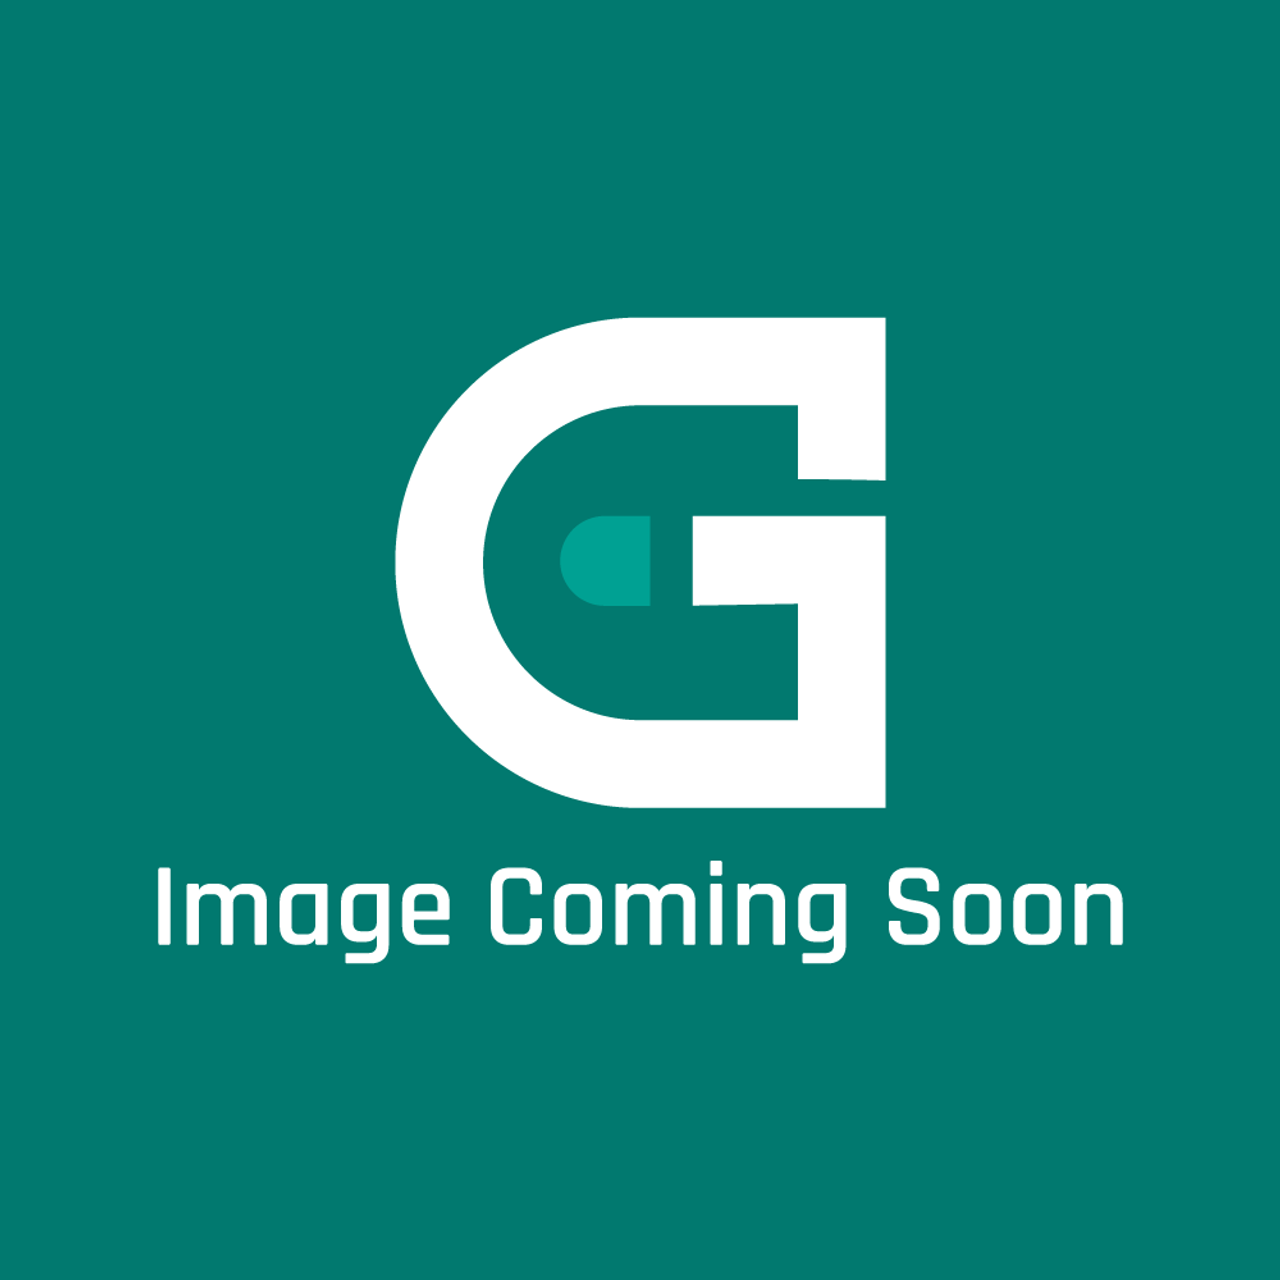 Frigidaire - Electrolux 140112523679 Dust Container - Image Coming Soon!